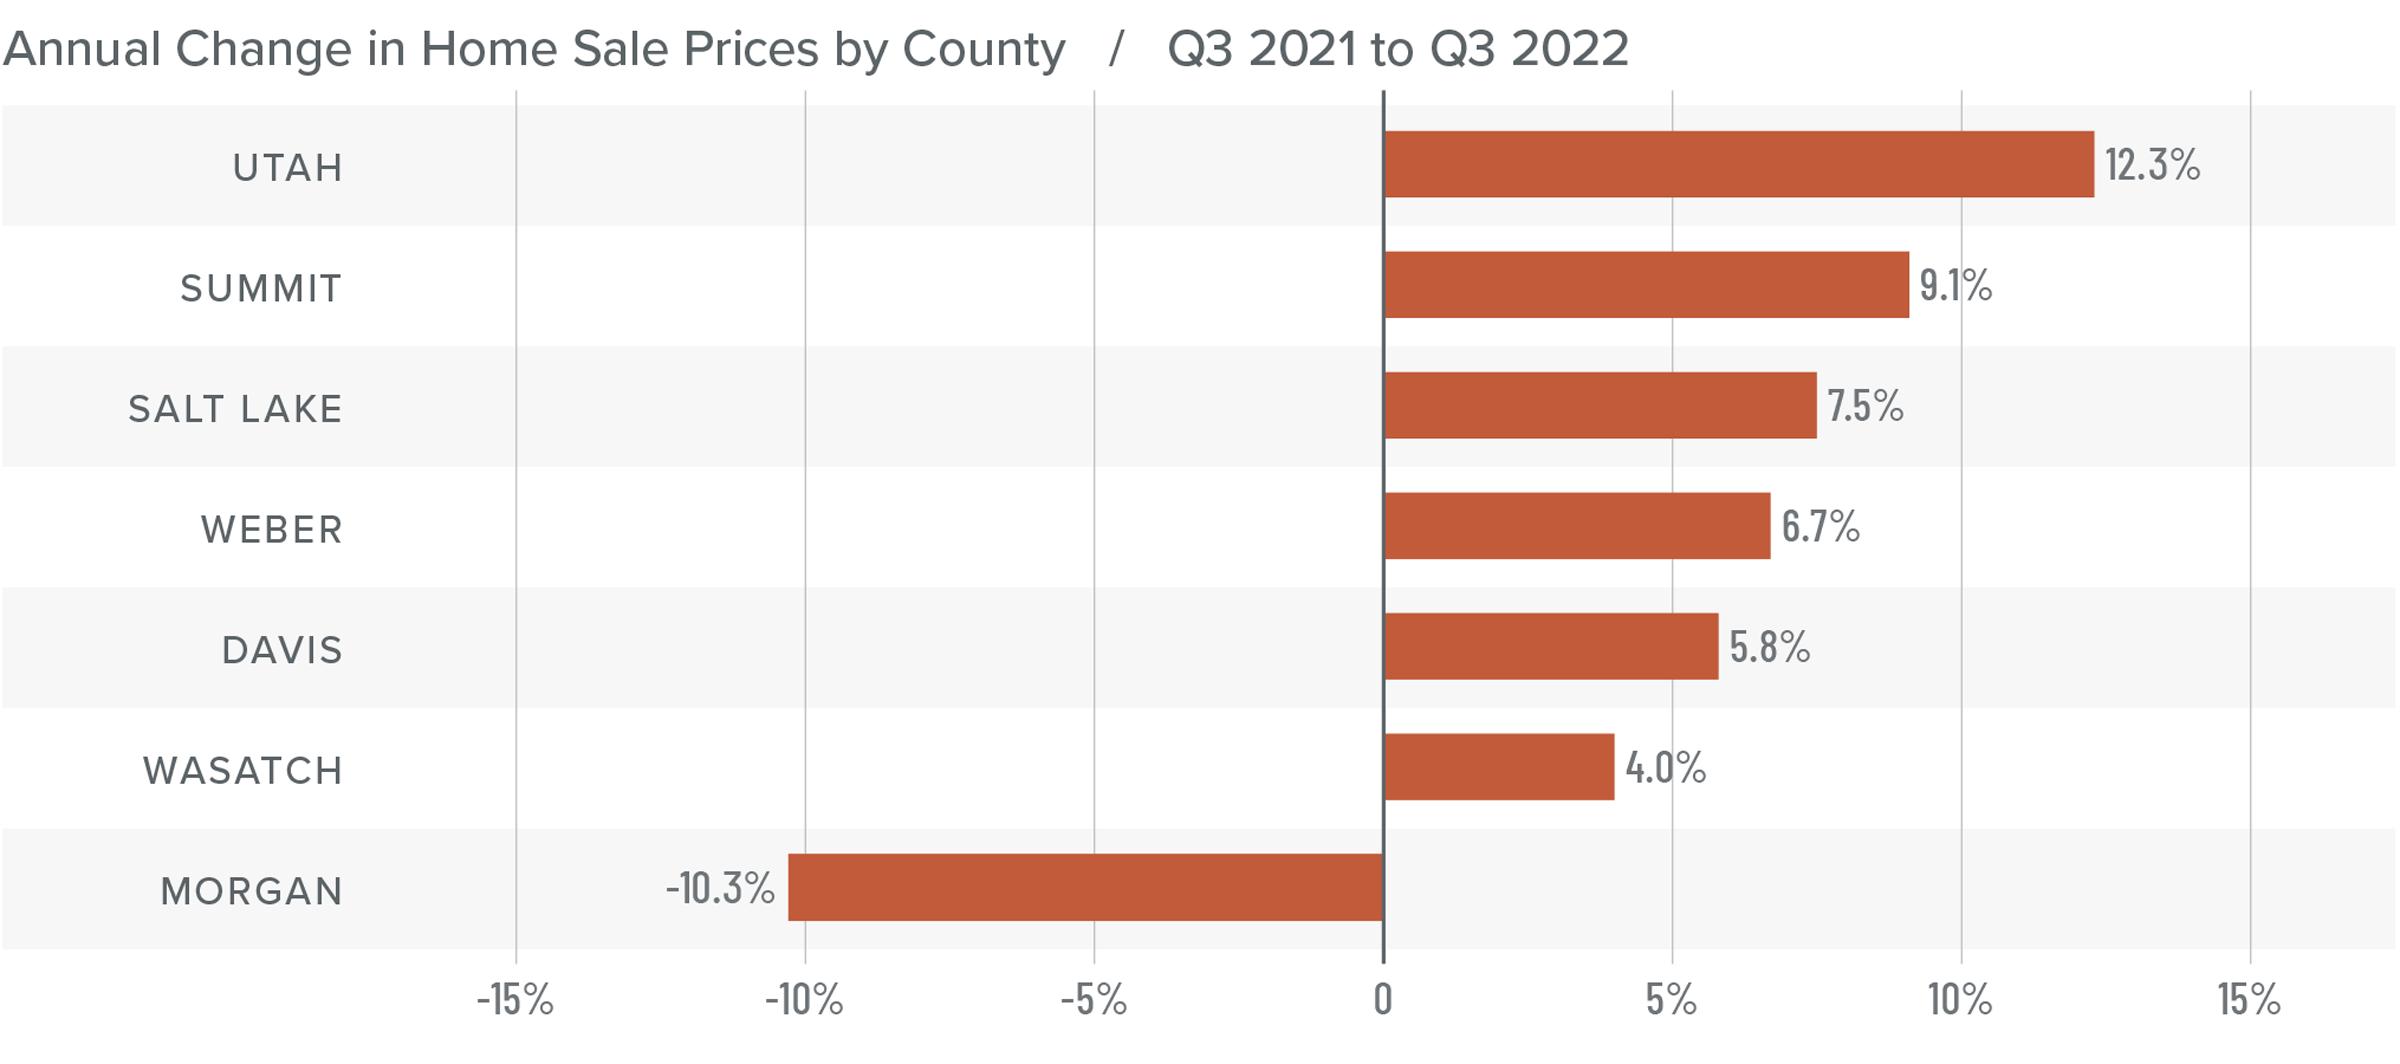 A bar graph showing the annual change in home sale prices for various counties in Utah from Q3 2021 to Q3 2022. Utah County tops the list at 12.3%, followed by Summit at 9.1%, Salt Lake at 7.5%, Weber at 6.7%, Davis at 5.8%, Wasatch at 4%, and Morgan at -10.3%.